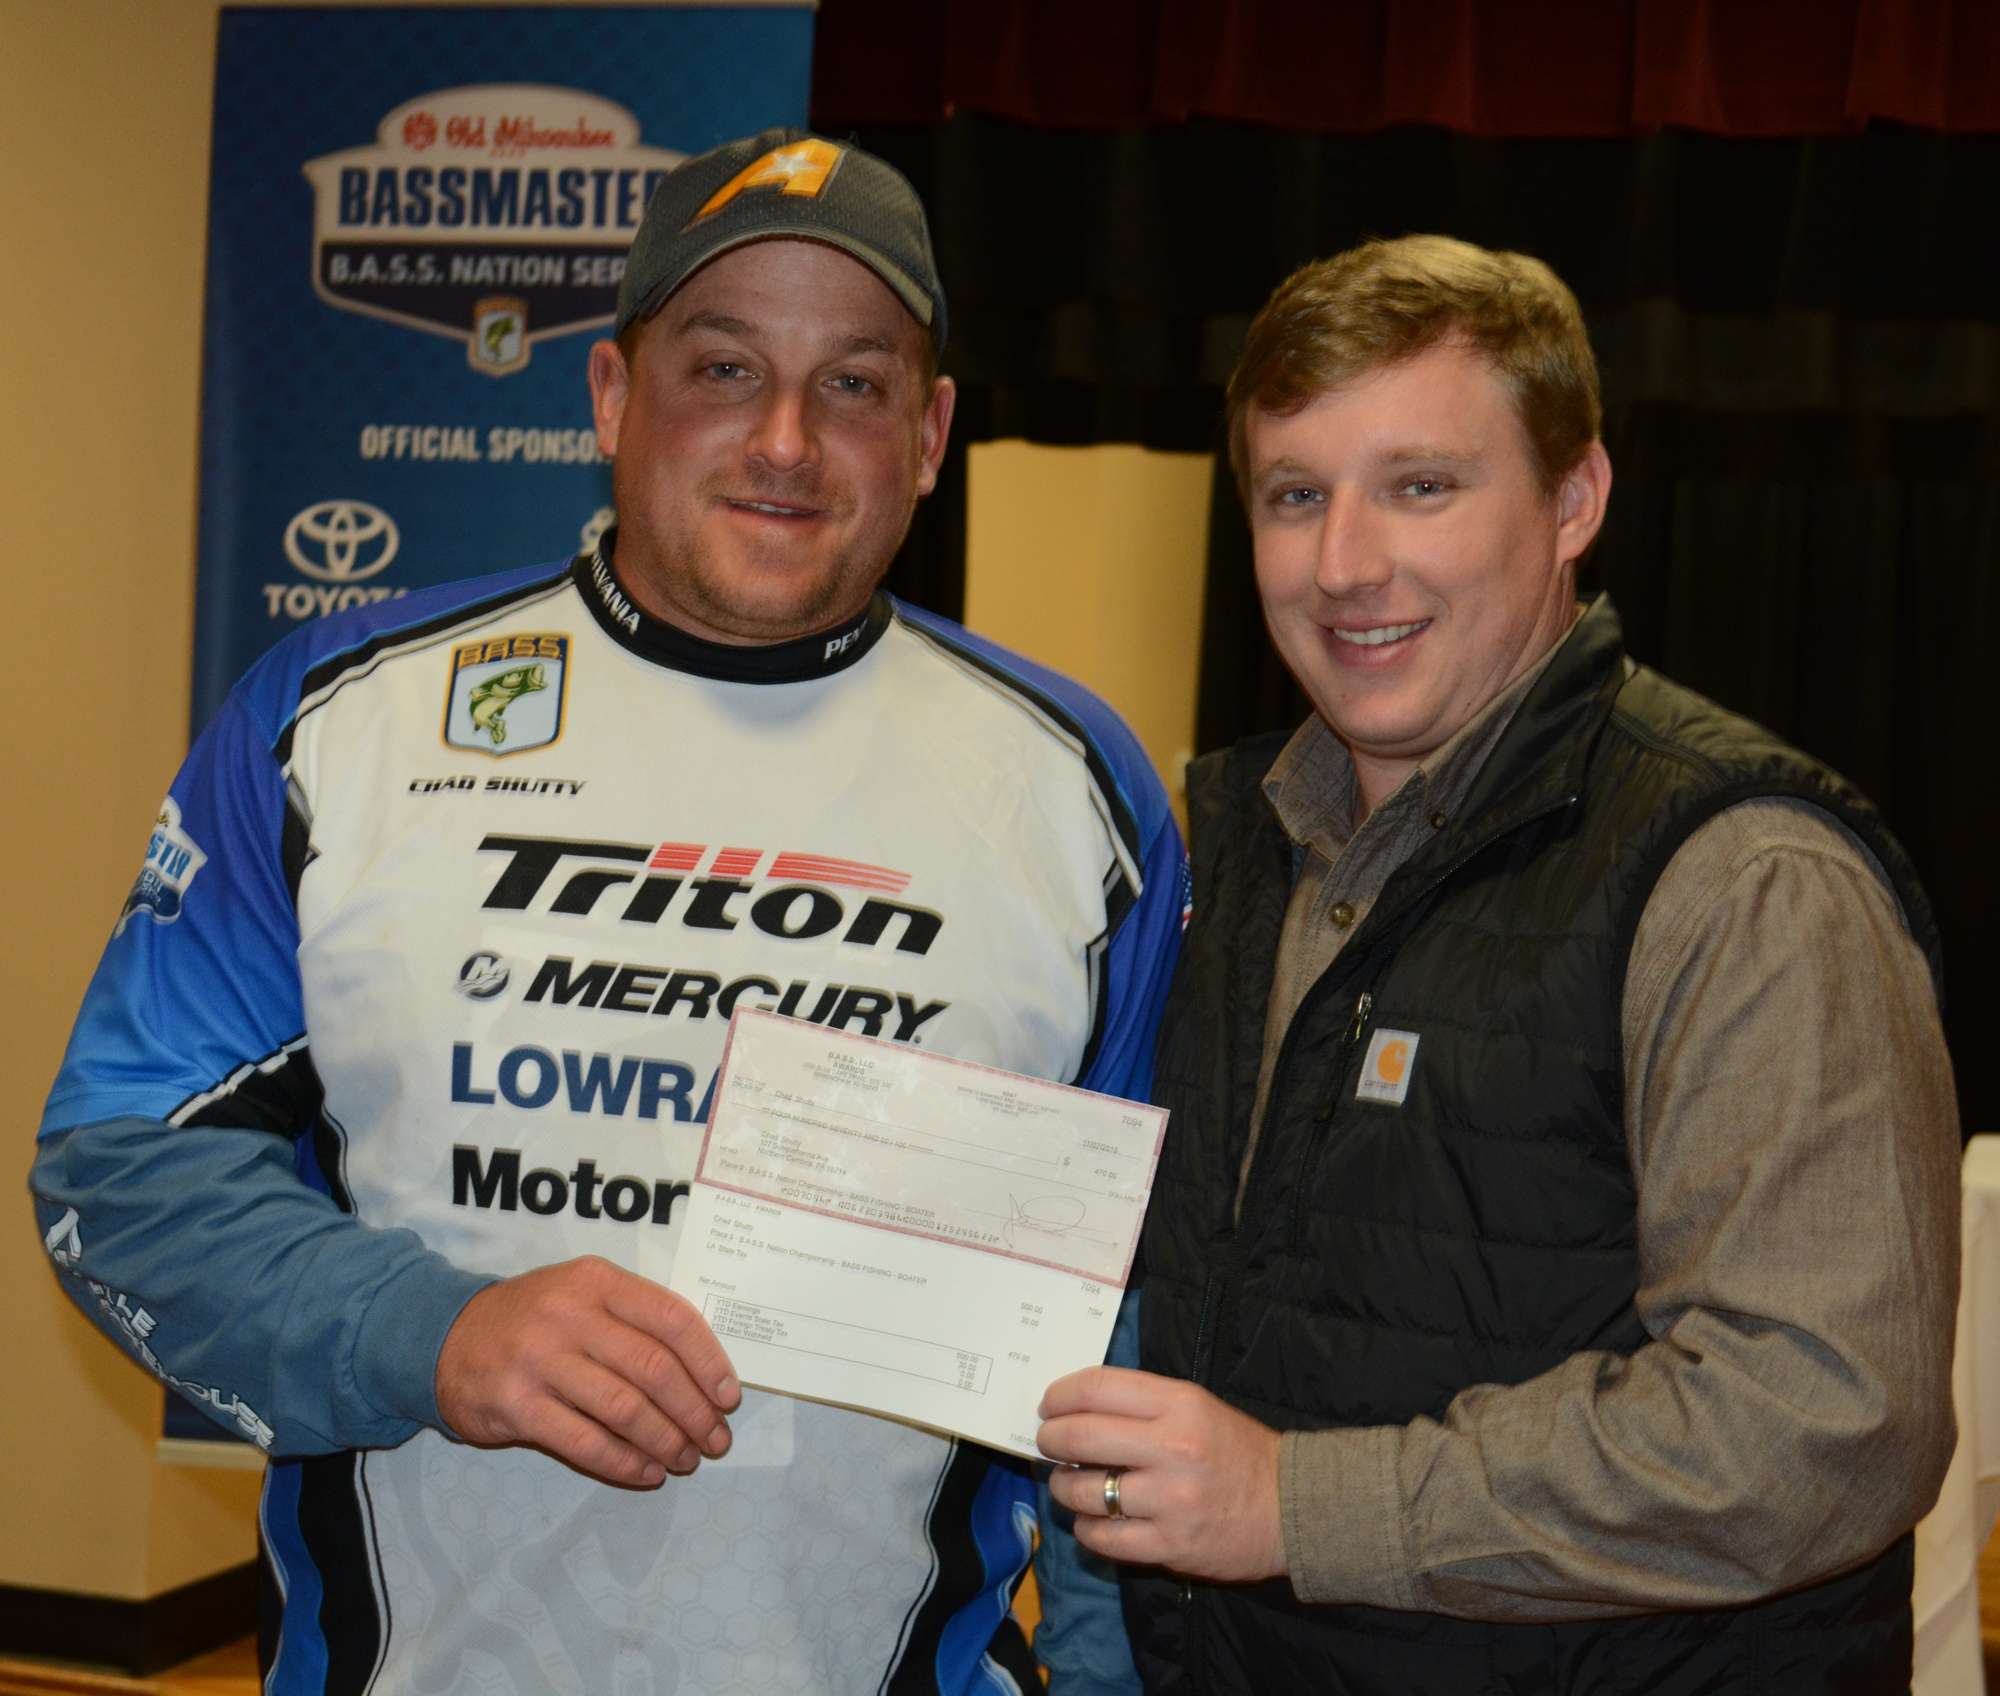 The Top 10 anglers were also honored. First up was Chad Shutty, ninth place, from Pennsylvania.